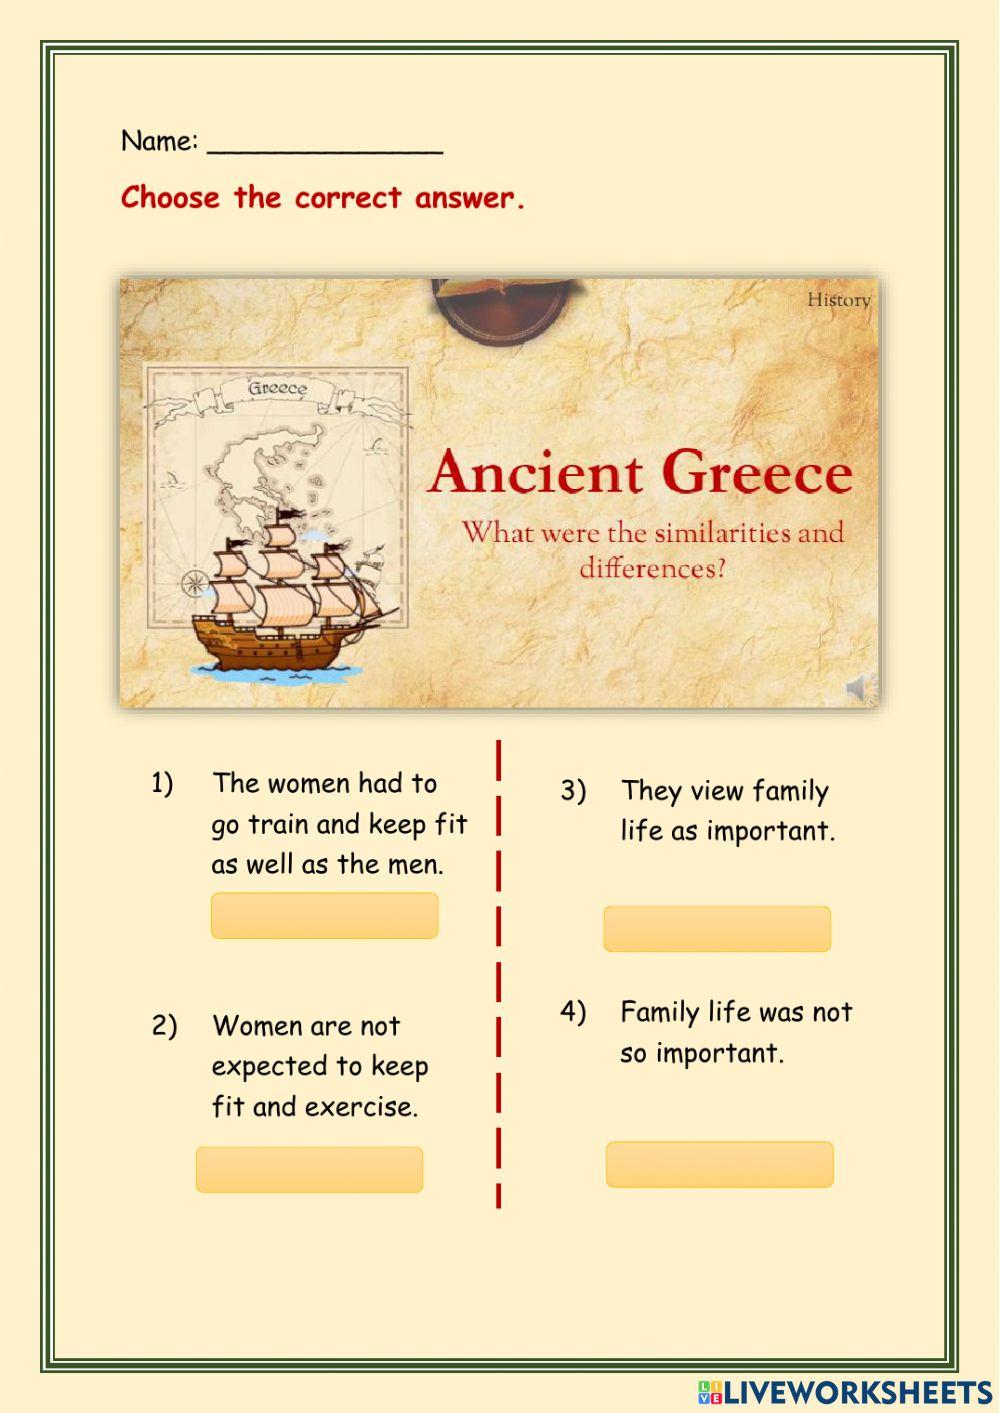 Ancient Greece family and city life